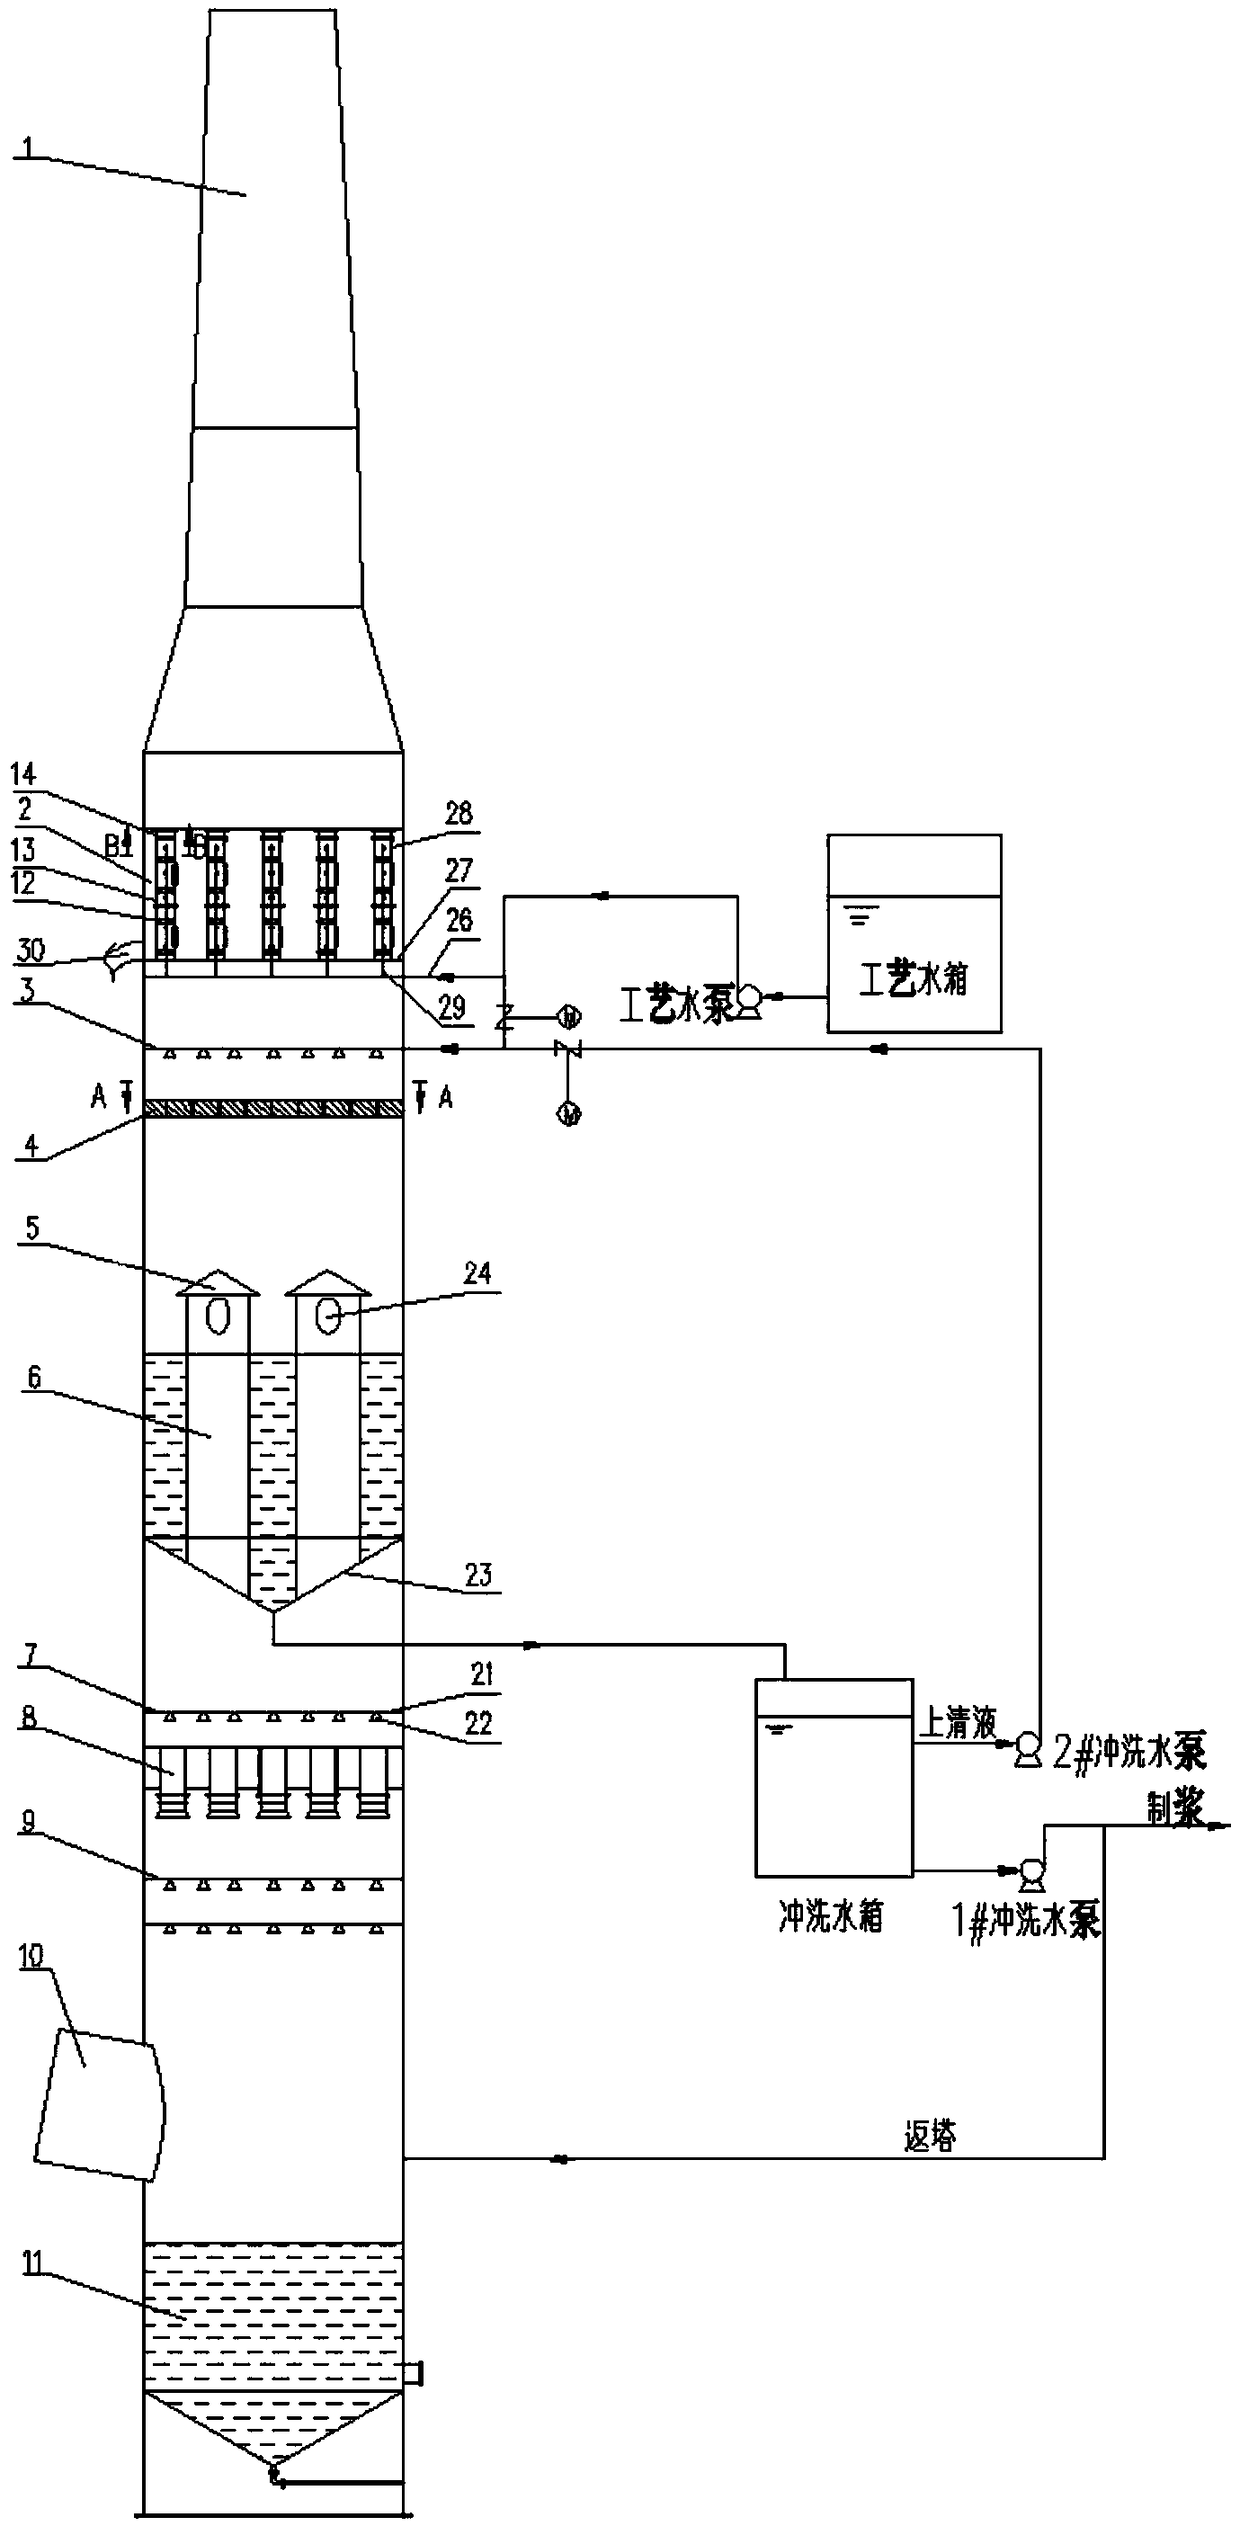 A flue gas ultra-low emission absorption tower device and its application